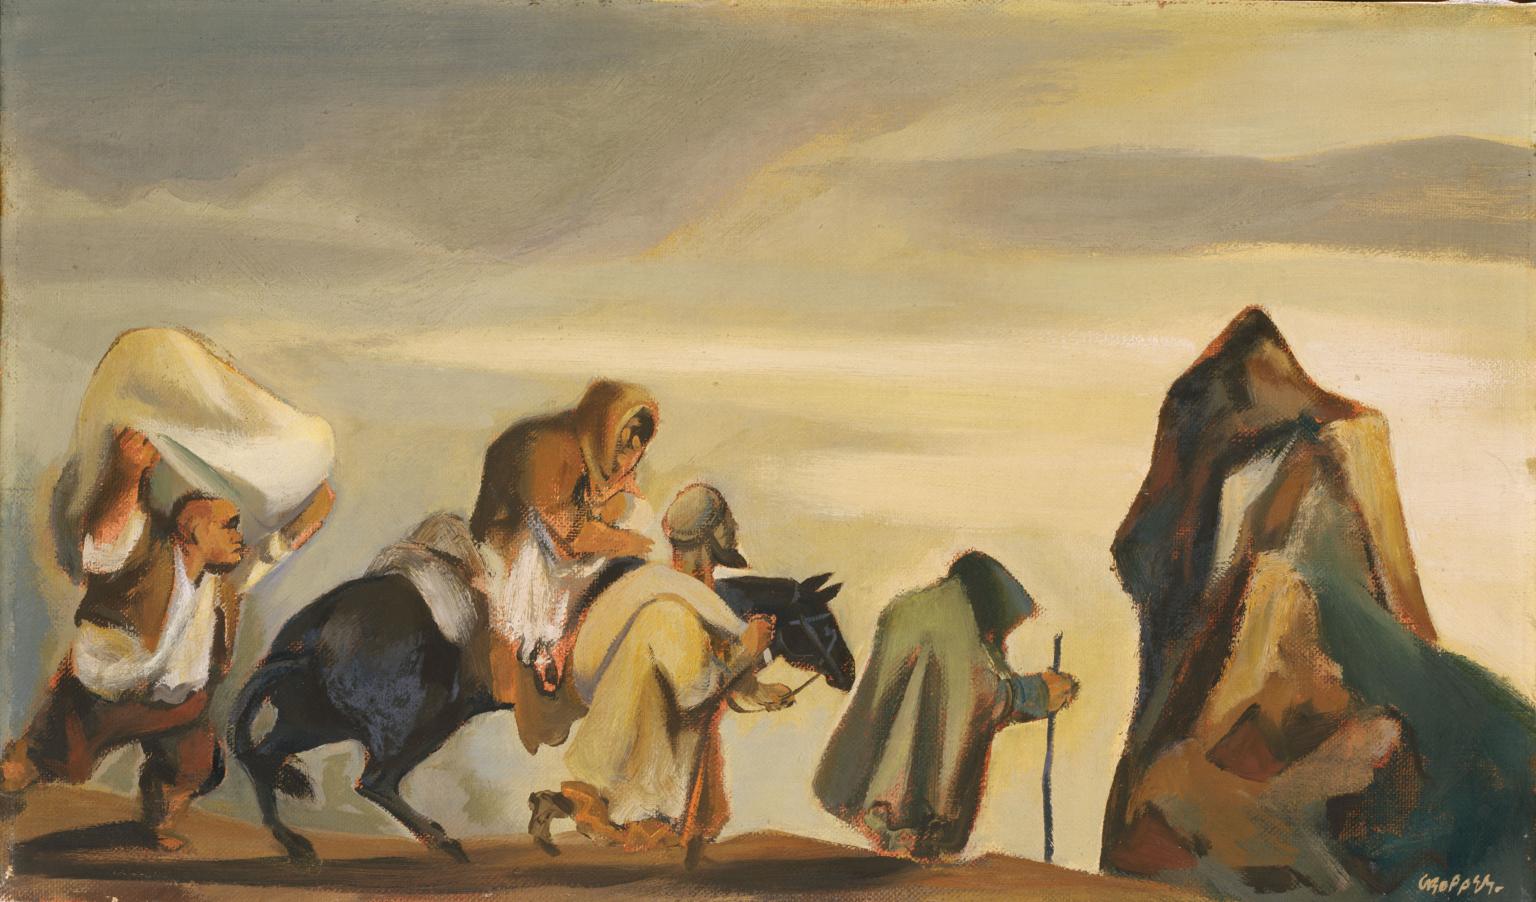 Painting of people walking through desert carrying bundles and another figure riding a horse. 